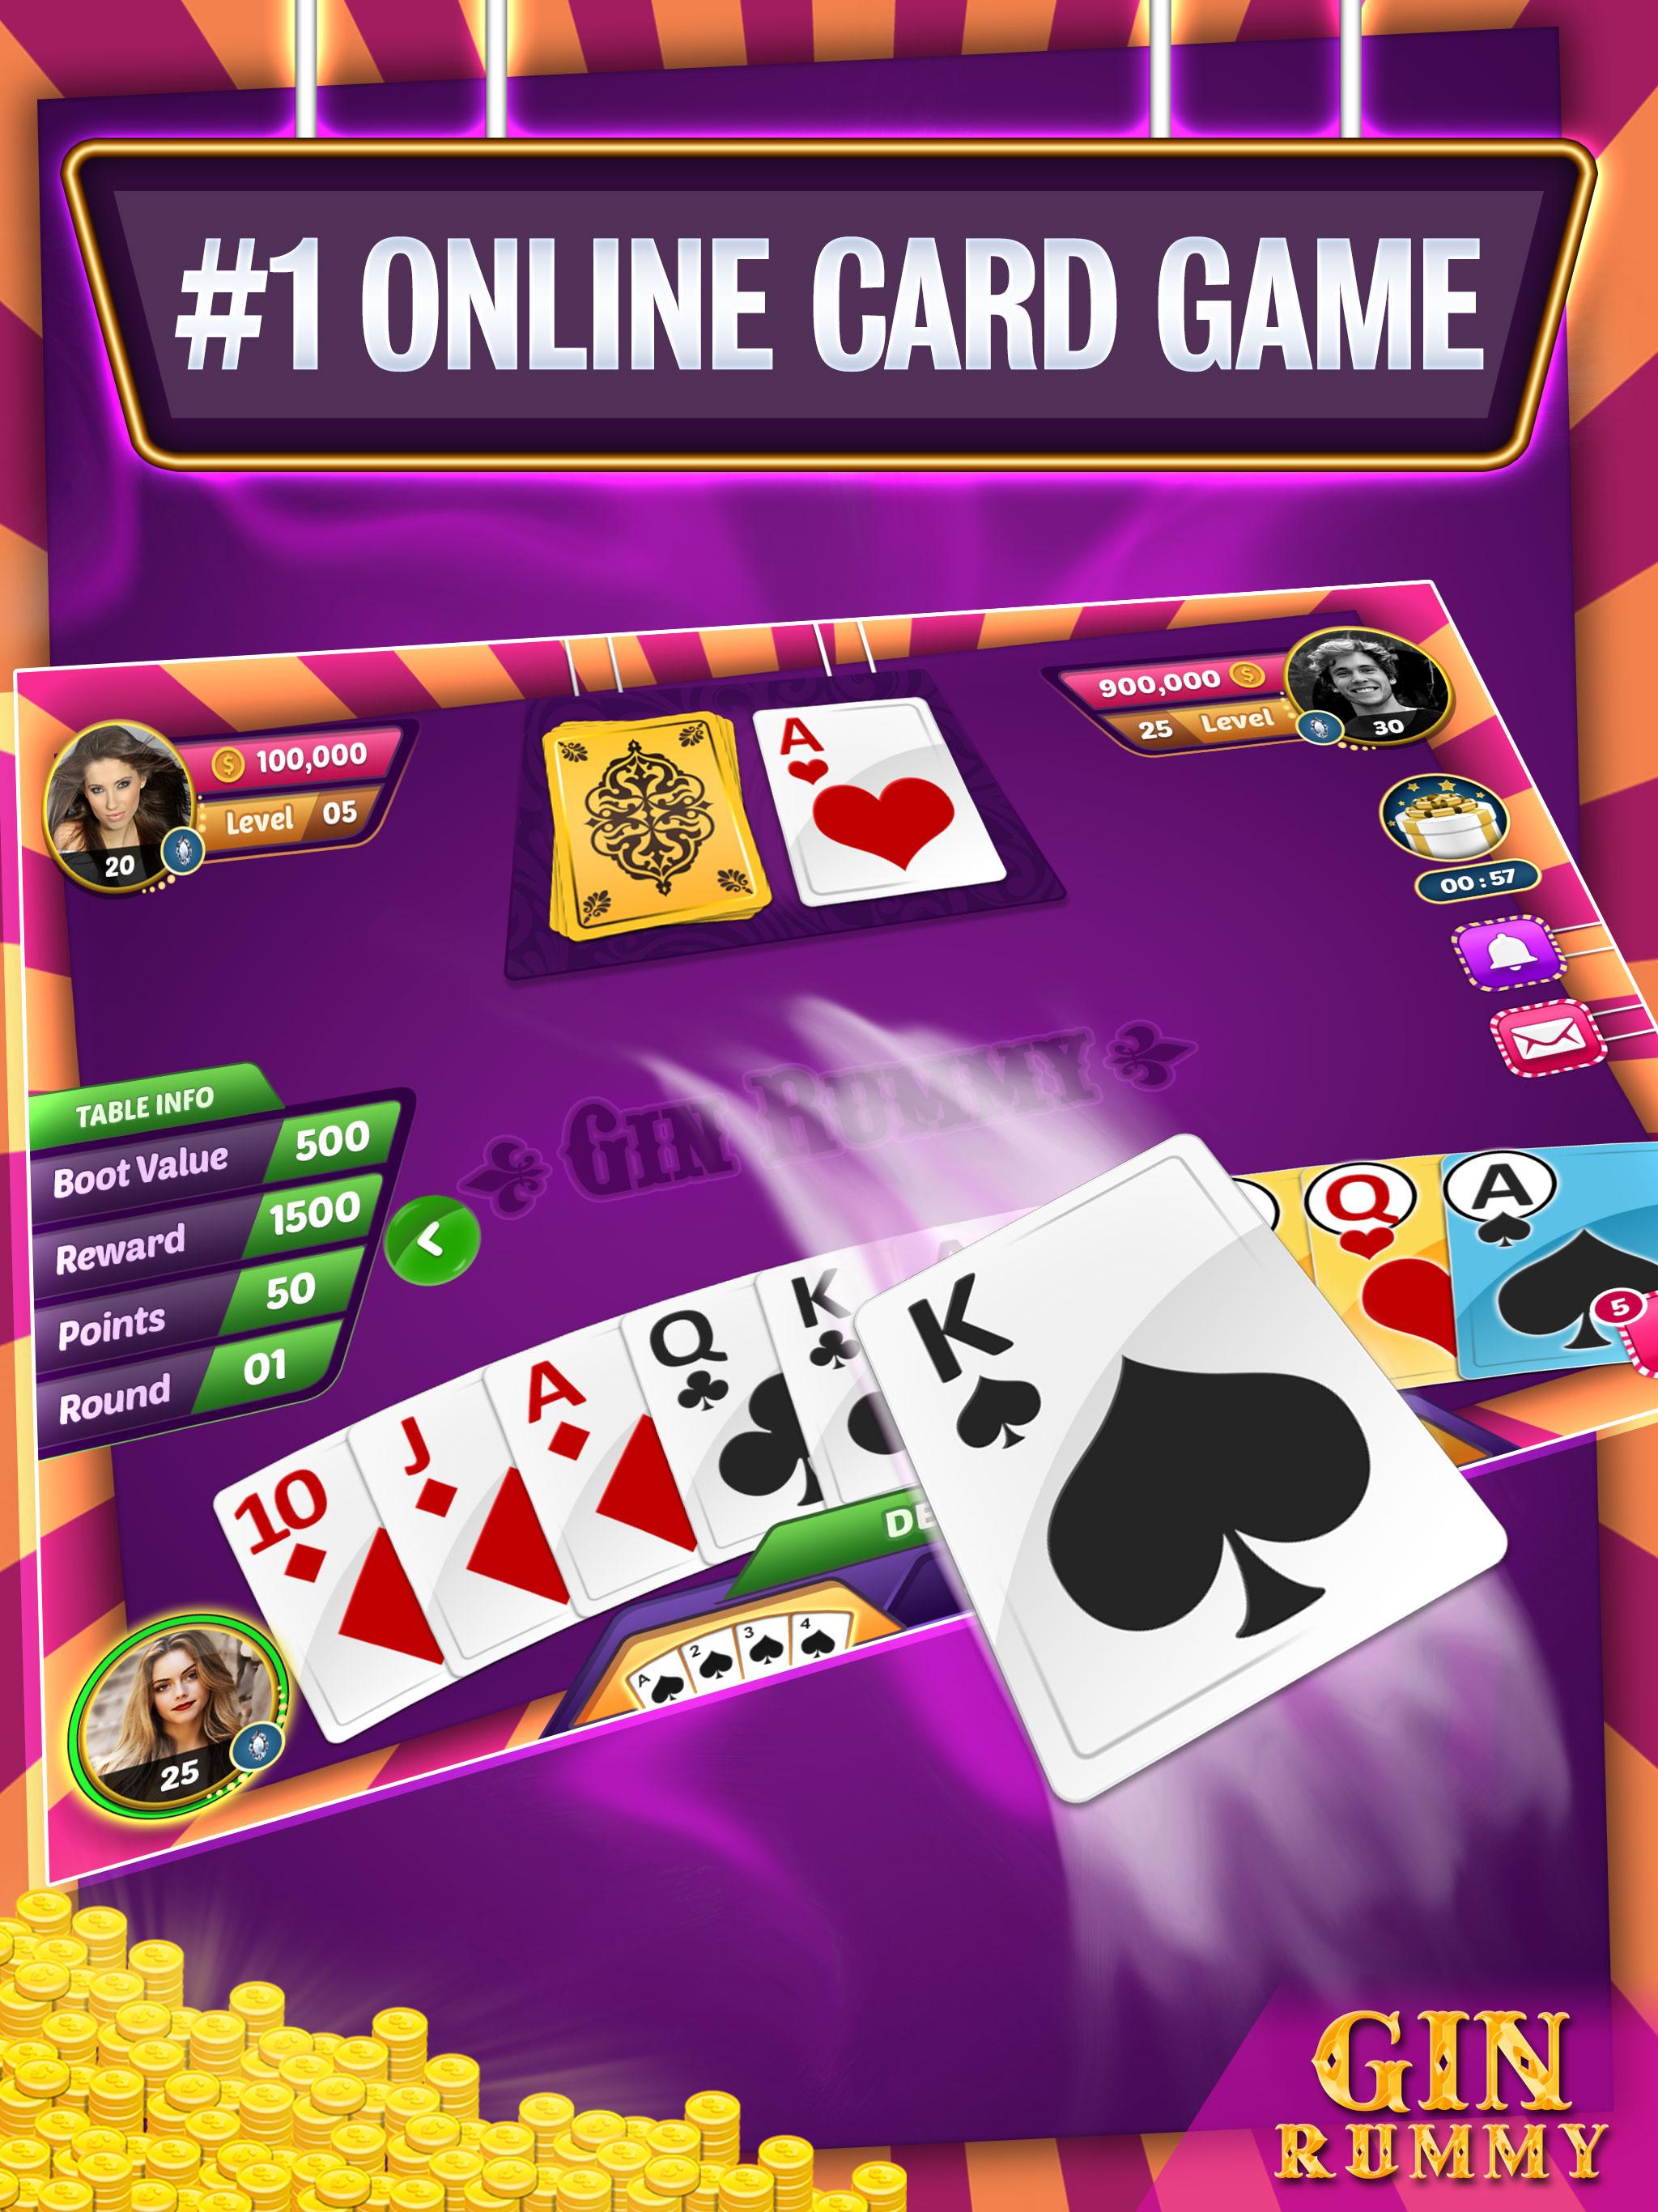 Gin Rummy Online - Multiplayer Card Game APK 14.1 Download ...